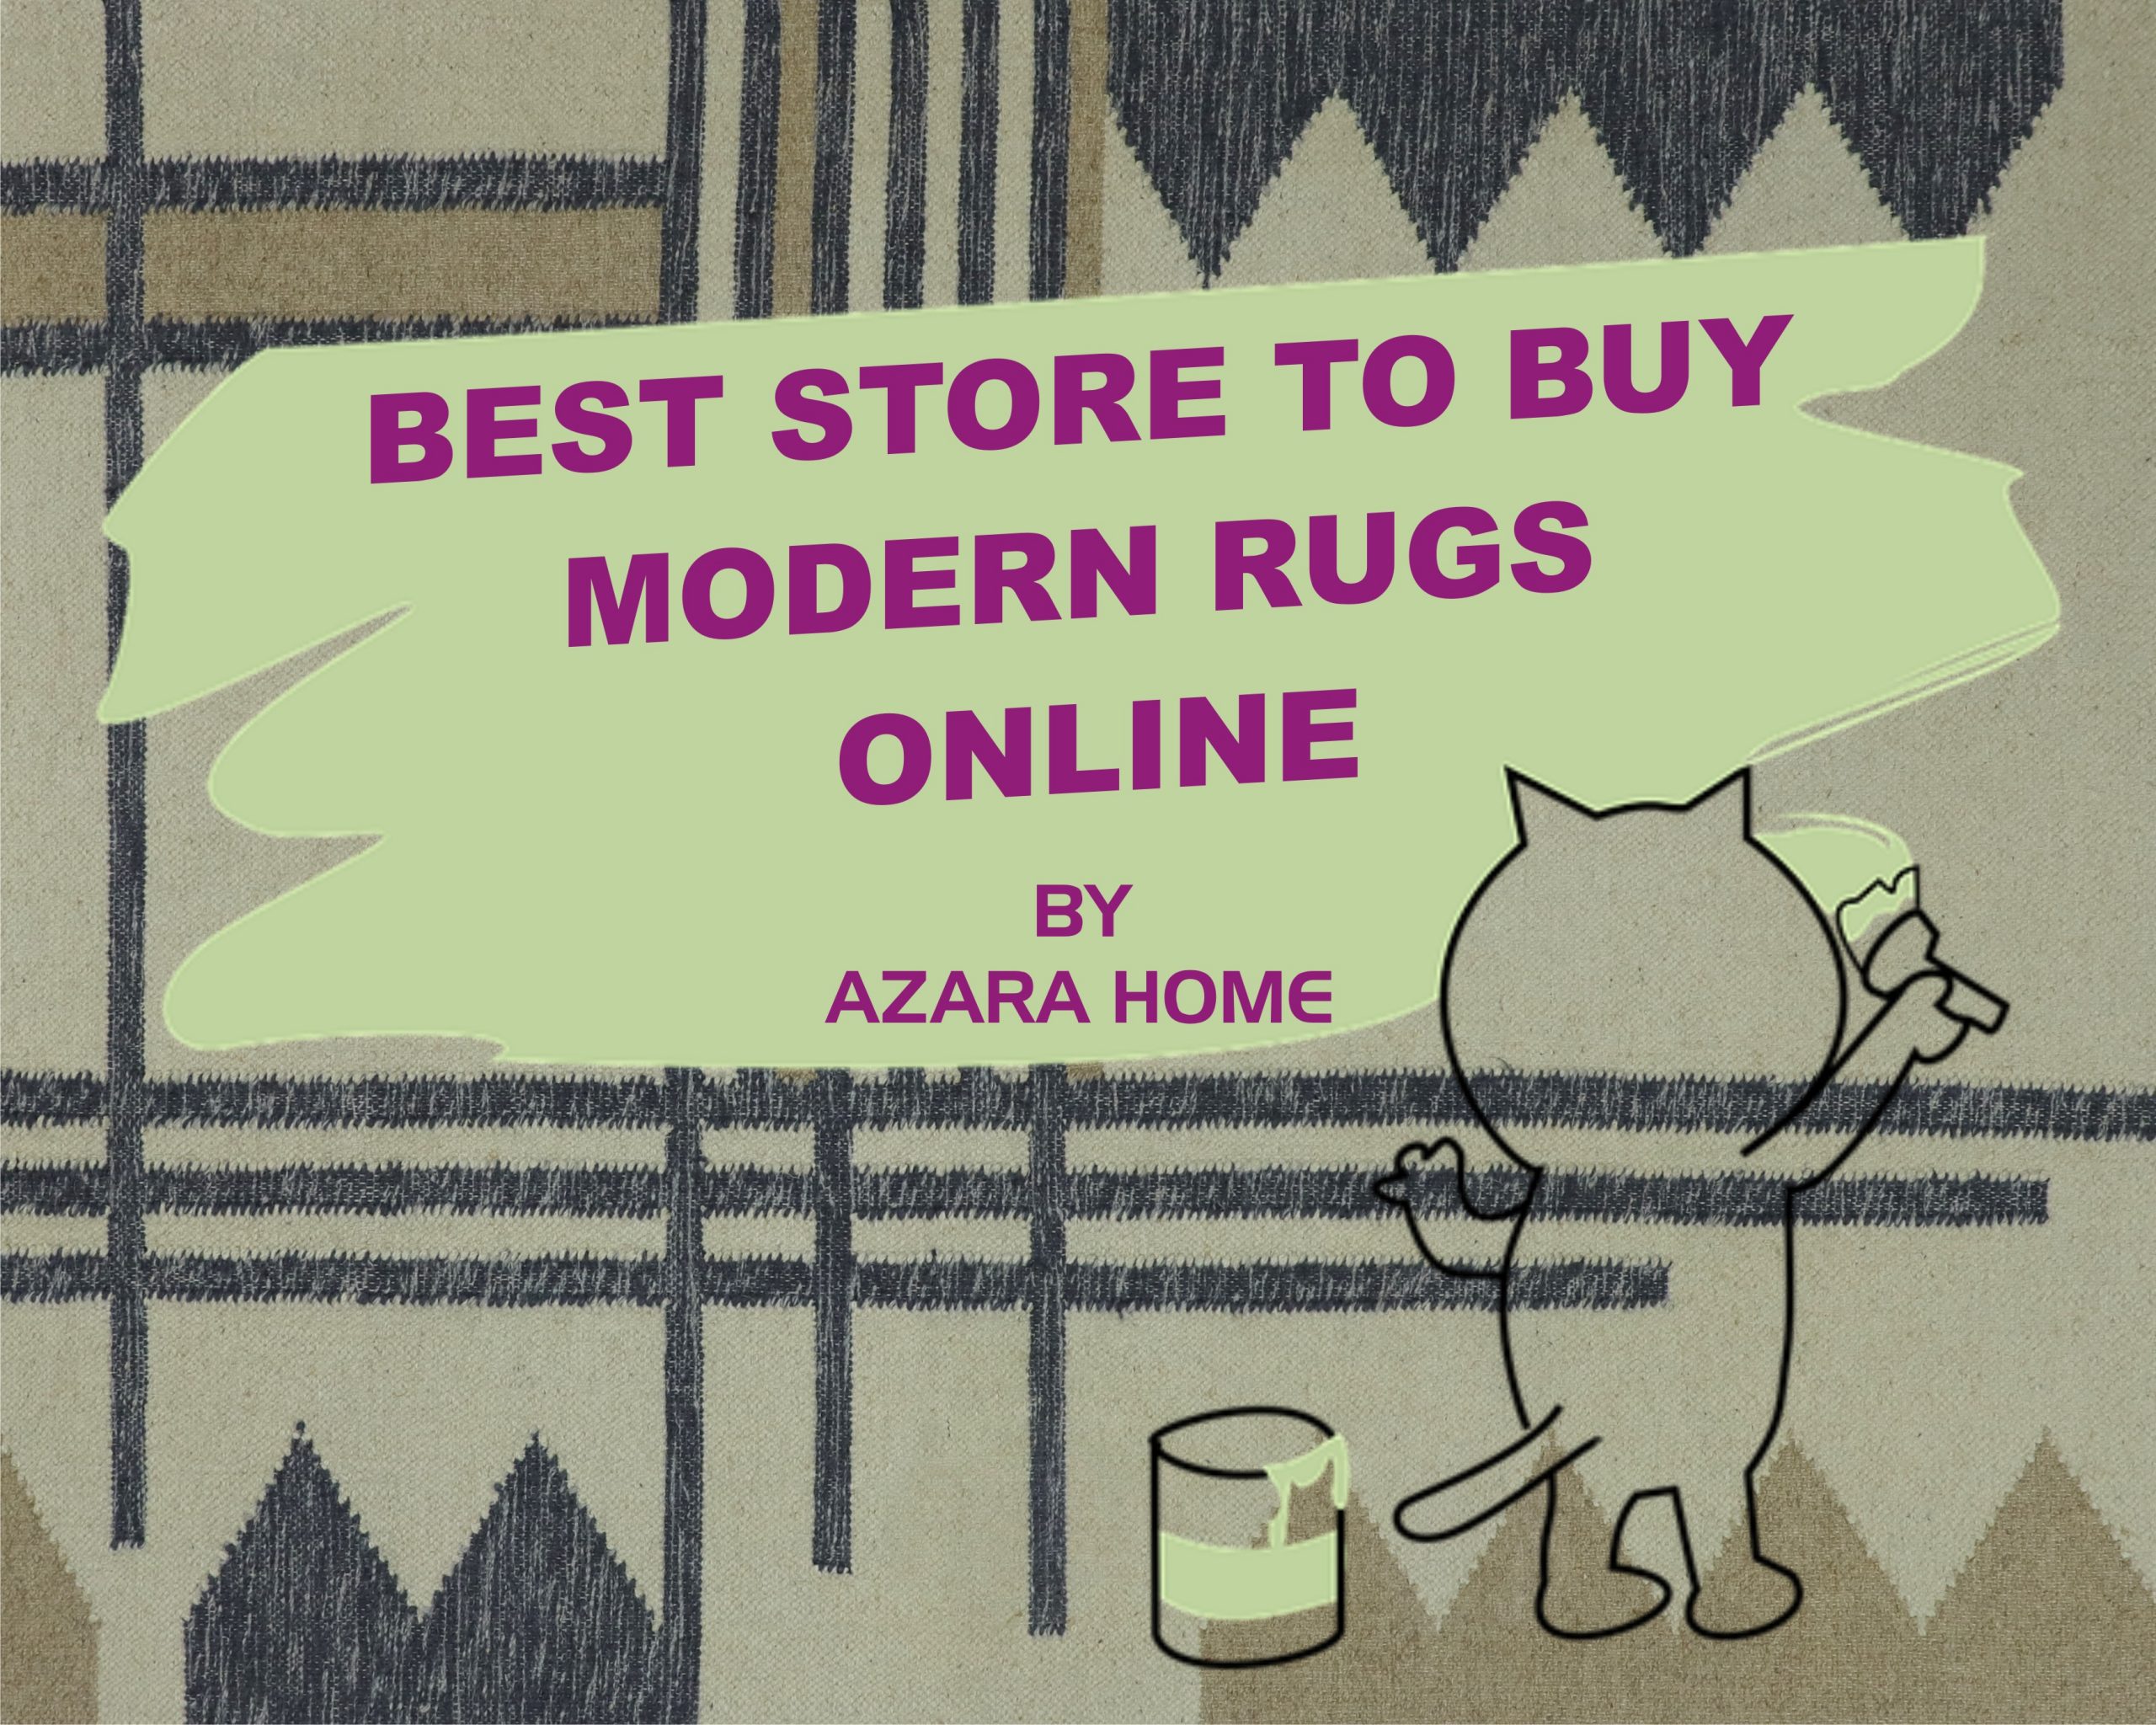 12c Years Xxx Fist Time - Best Store to Buy Modern Carpets & Rugs Online - Azara Home